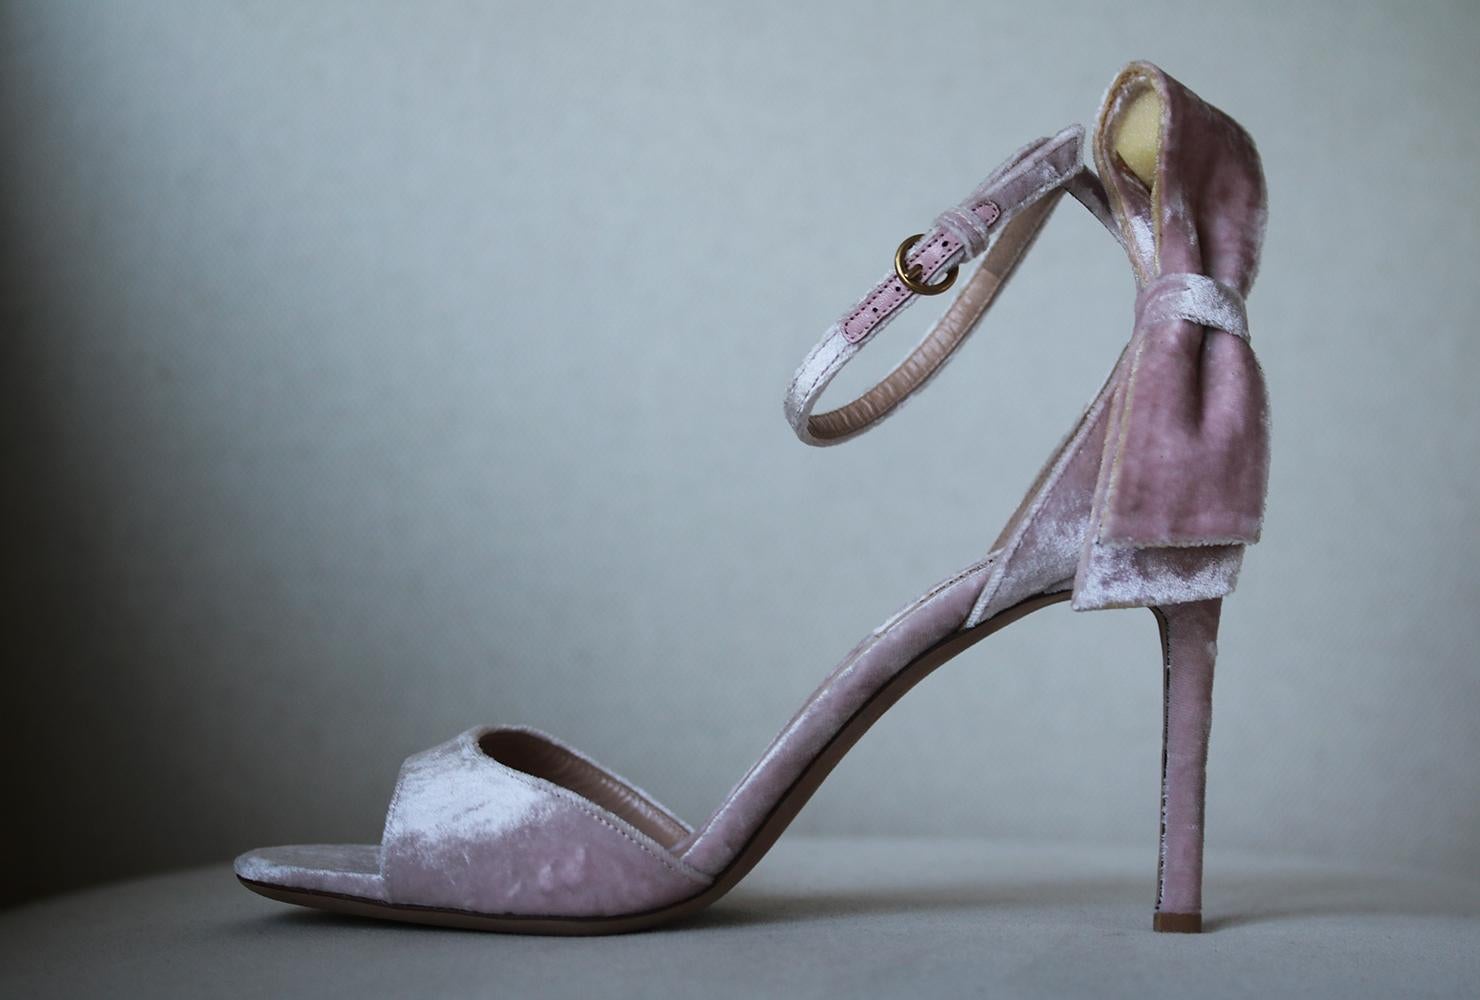 Valentino's sandals have been made in Italy from crushed-velvet - a fabric that's set to have a another major moment come fall. They're detailed with a bow at the heel and have delicate ankle straps. Heel measures approximately 85mm/ 3.5 inches.